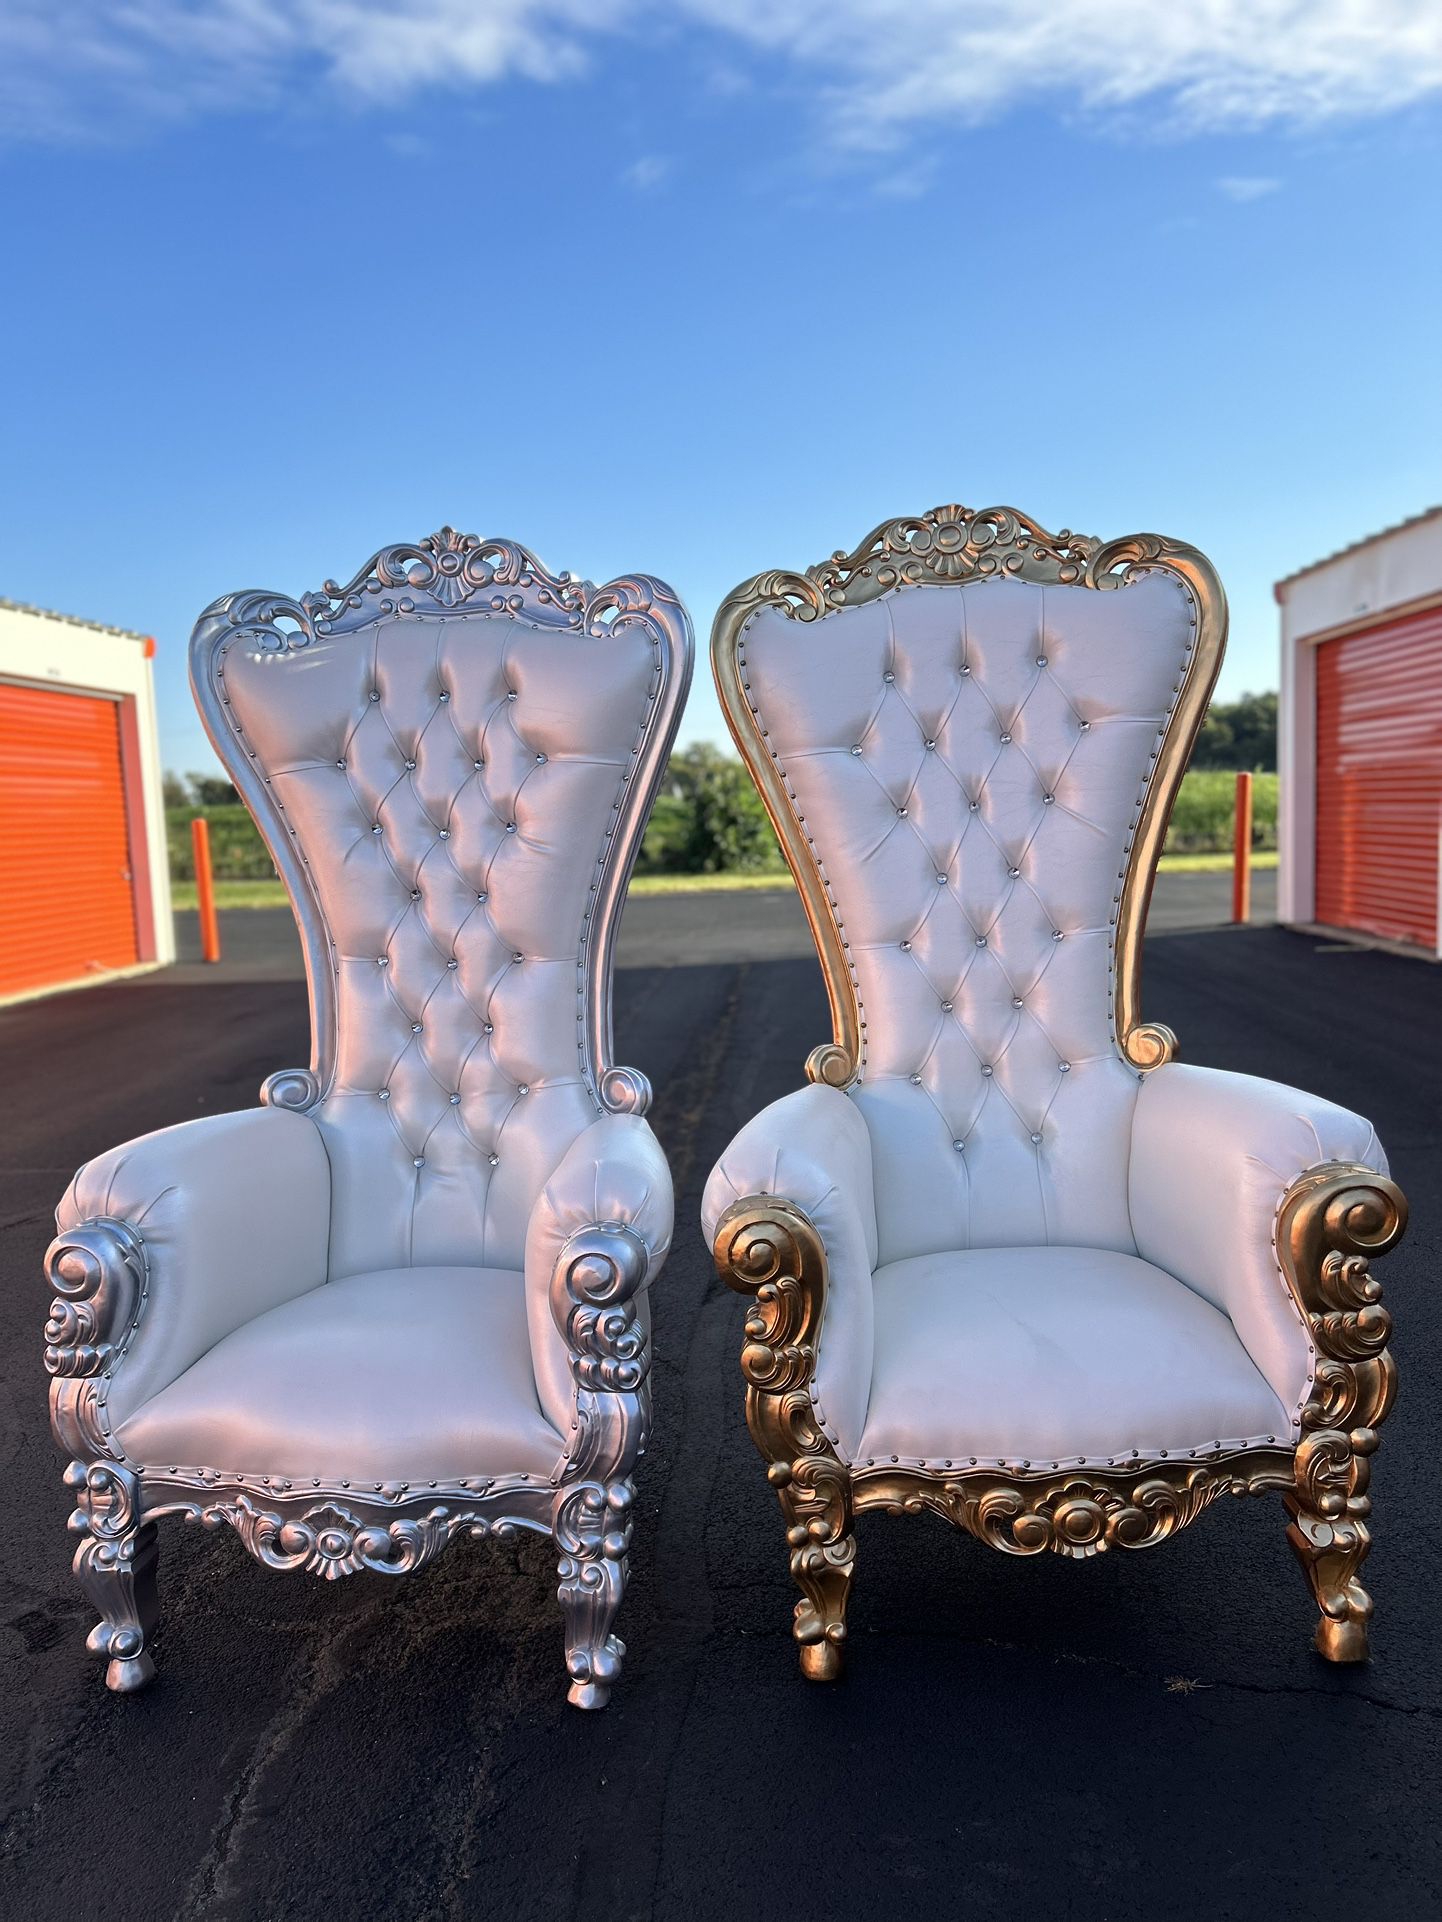 2 Throne Chairs For Sale $850 Each Golden & Silver “ Like New” 70” Height 35” Width 26 Length 